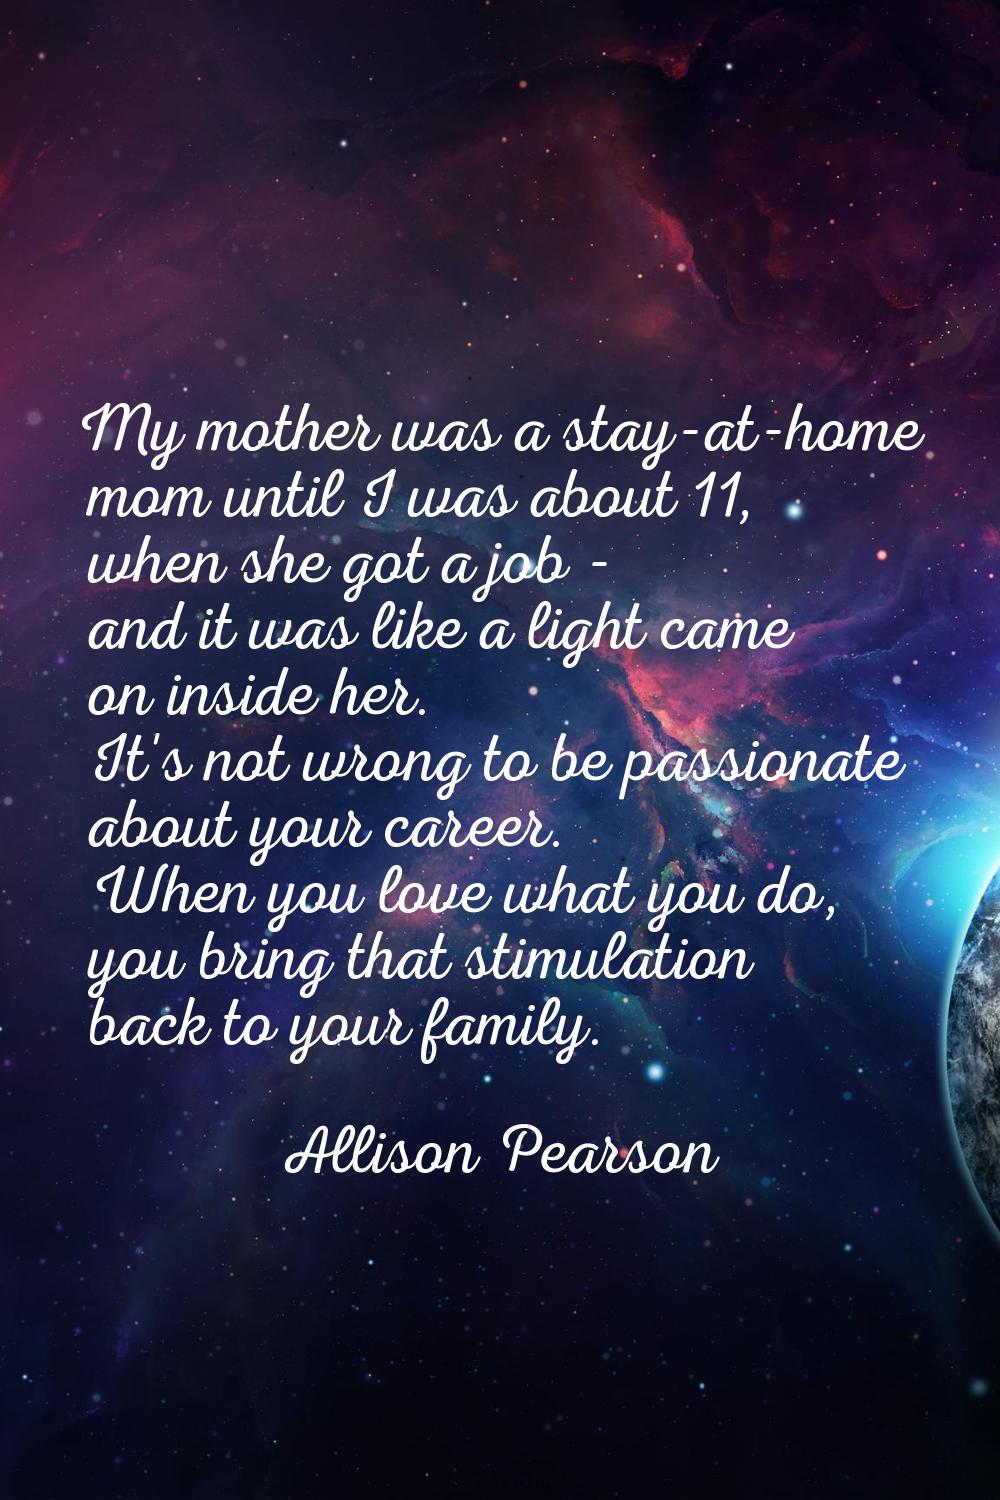 My mother was a stay-at-home mom until I was about 11, when she got a job - and it was like a light